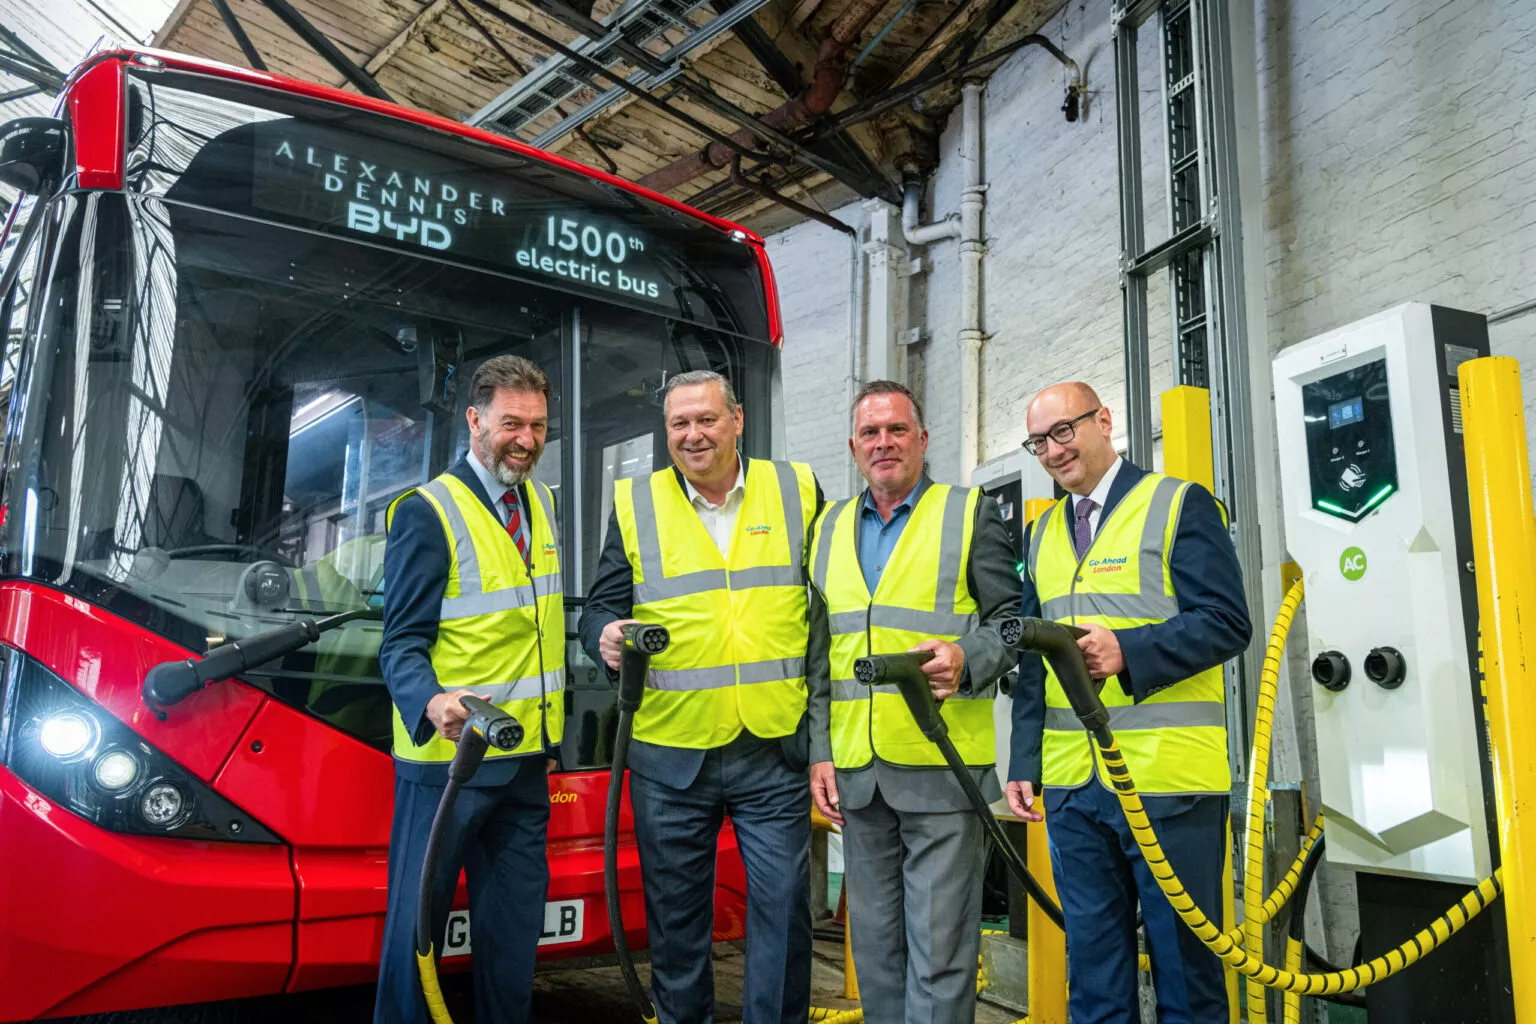 Four men in high visibility jackets hold electric vehicle charging plugs in front of a red single deck bus which has 'Alexander Dennis BYD 1500th electric bus' on its display